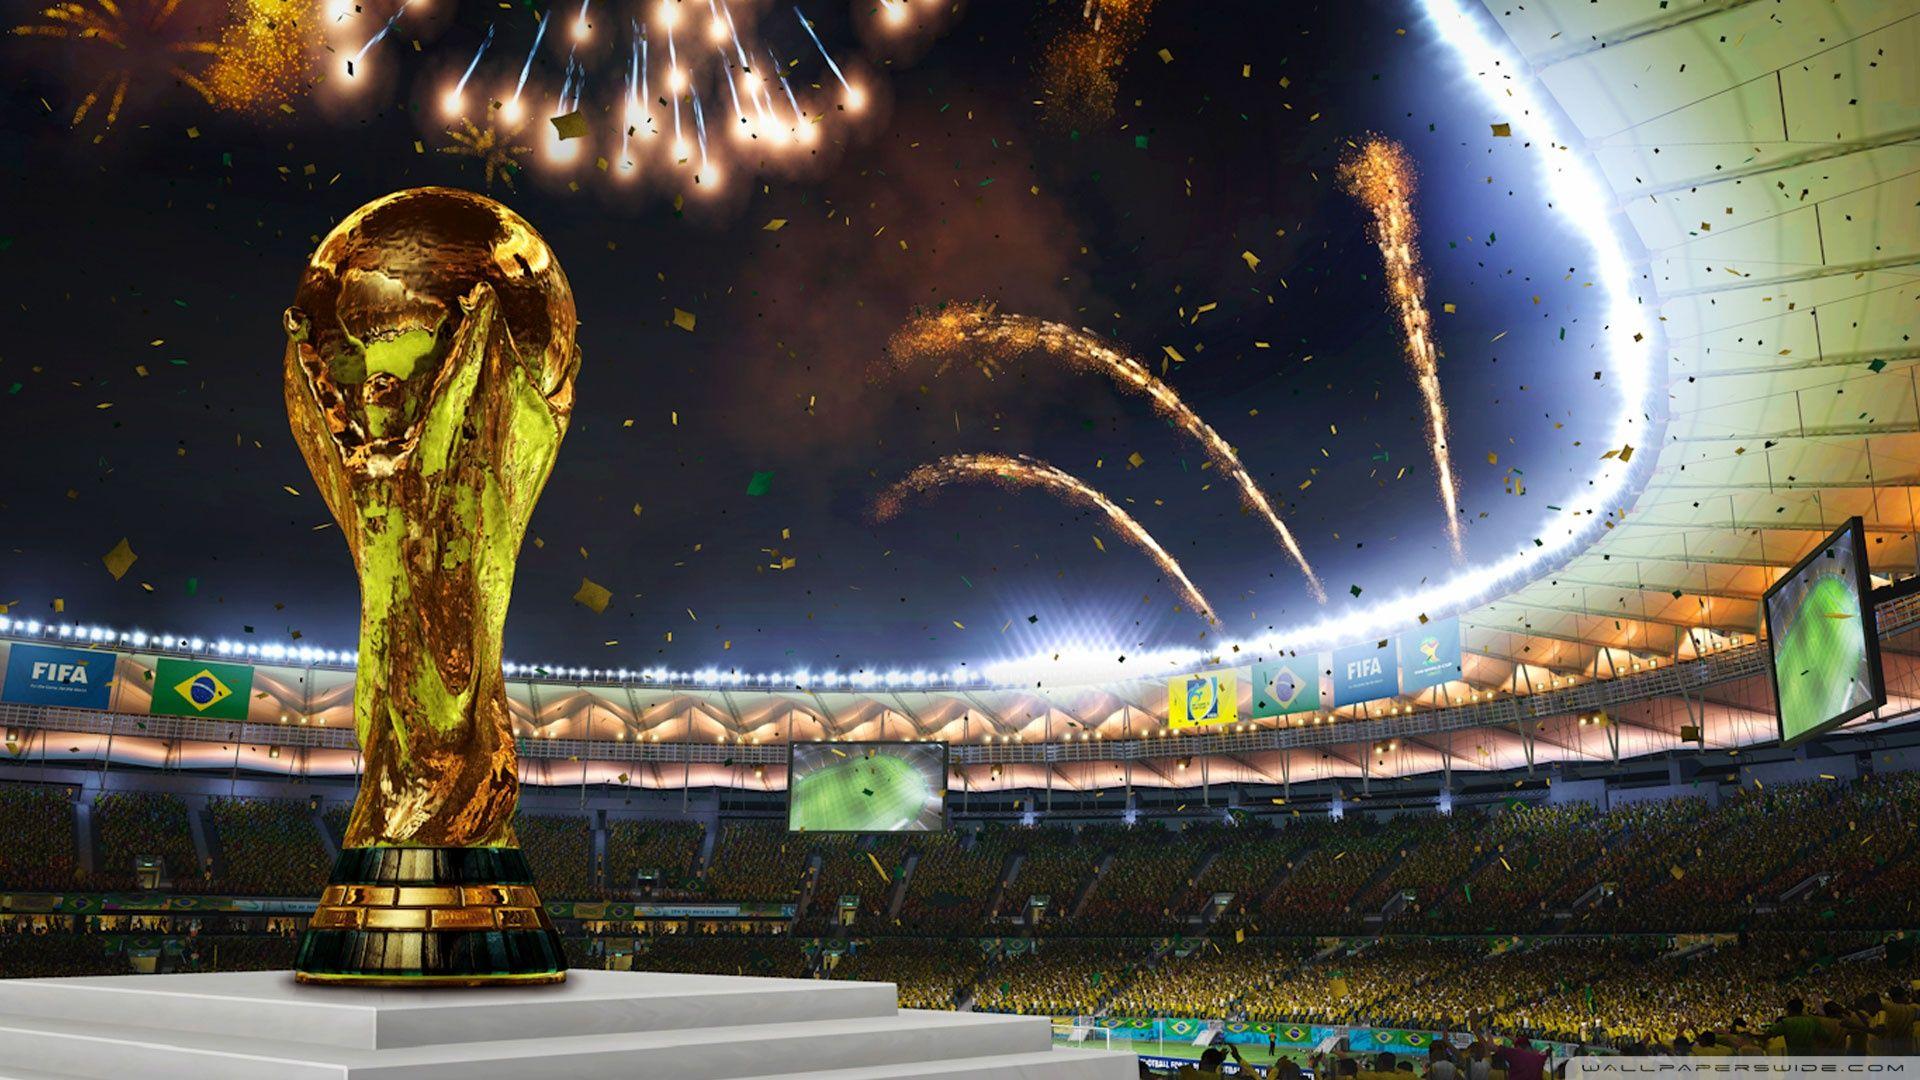 FIFA World Cup Background 9